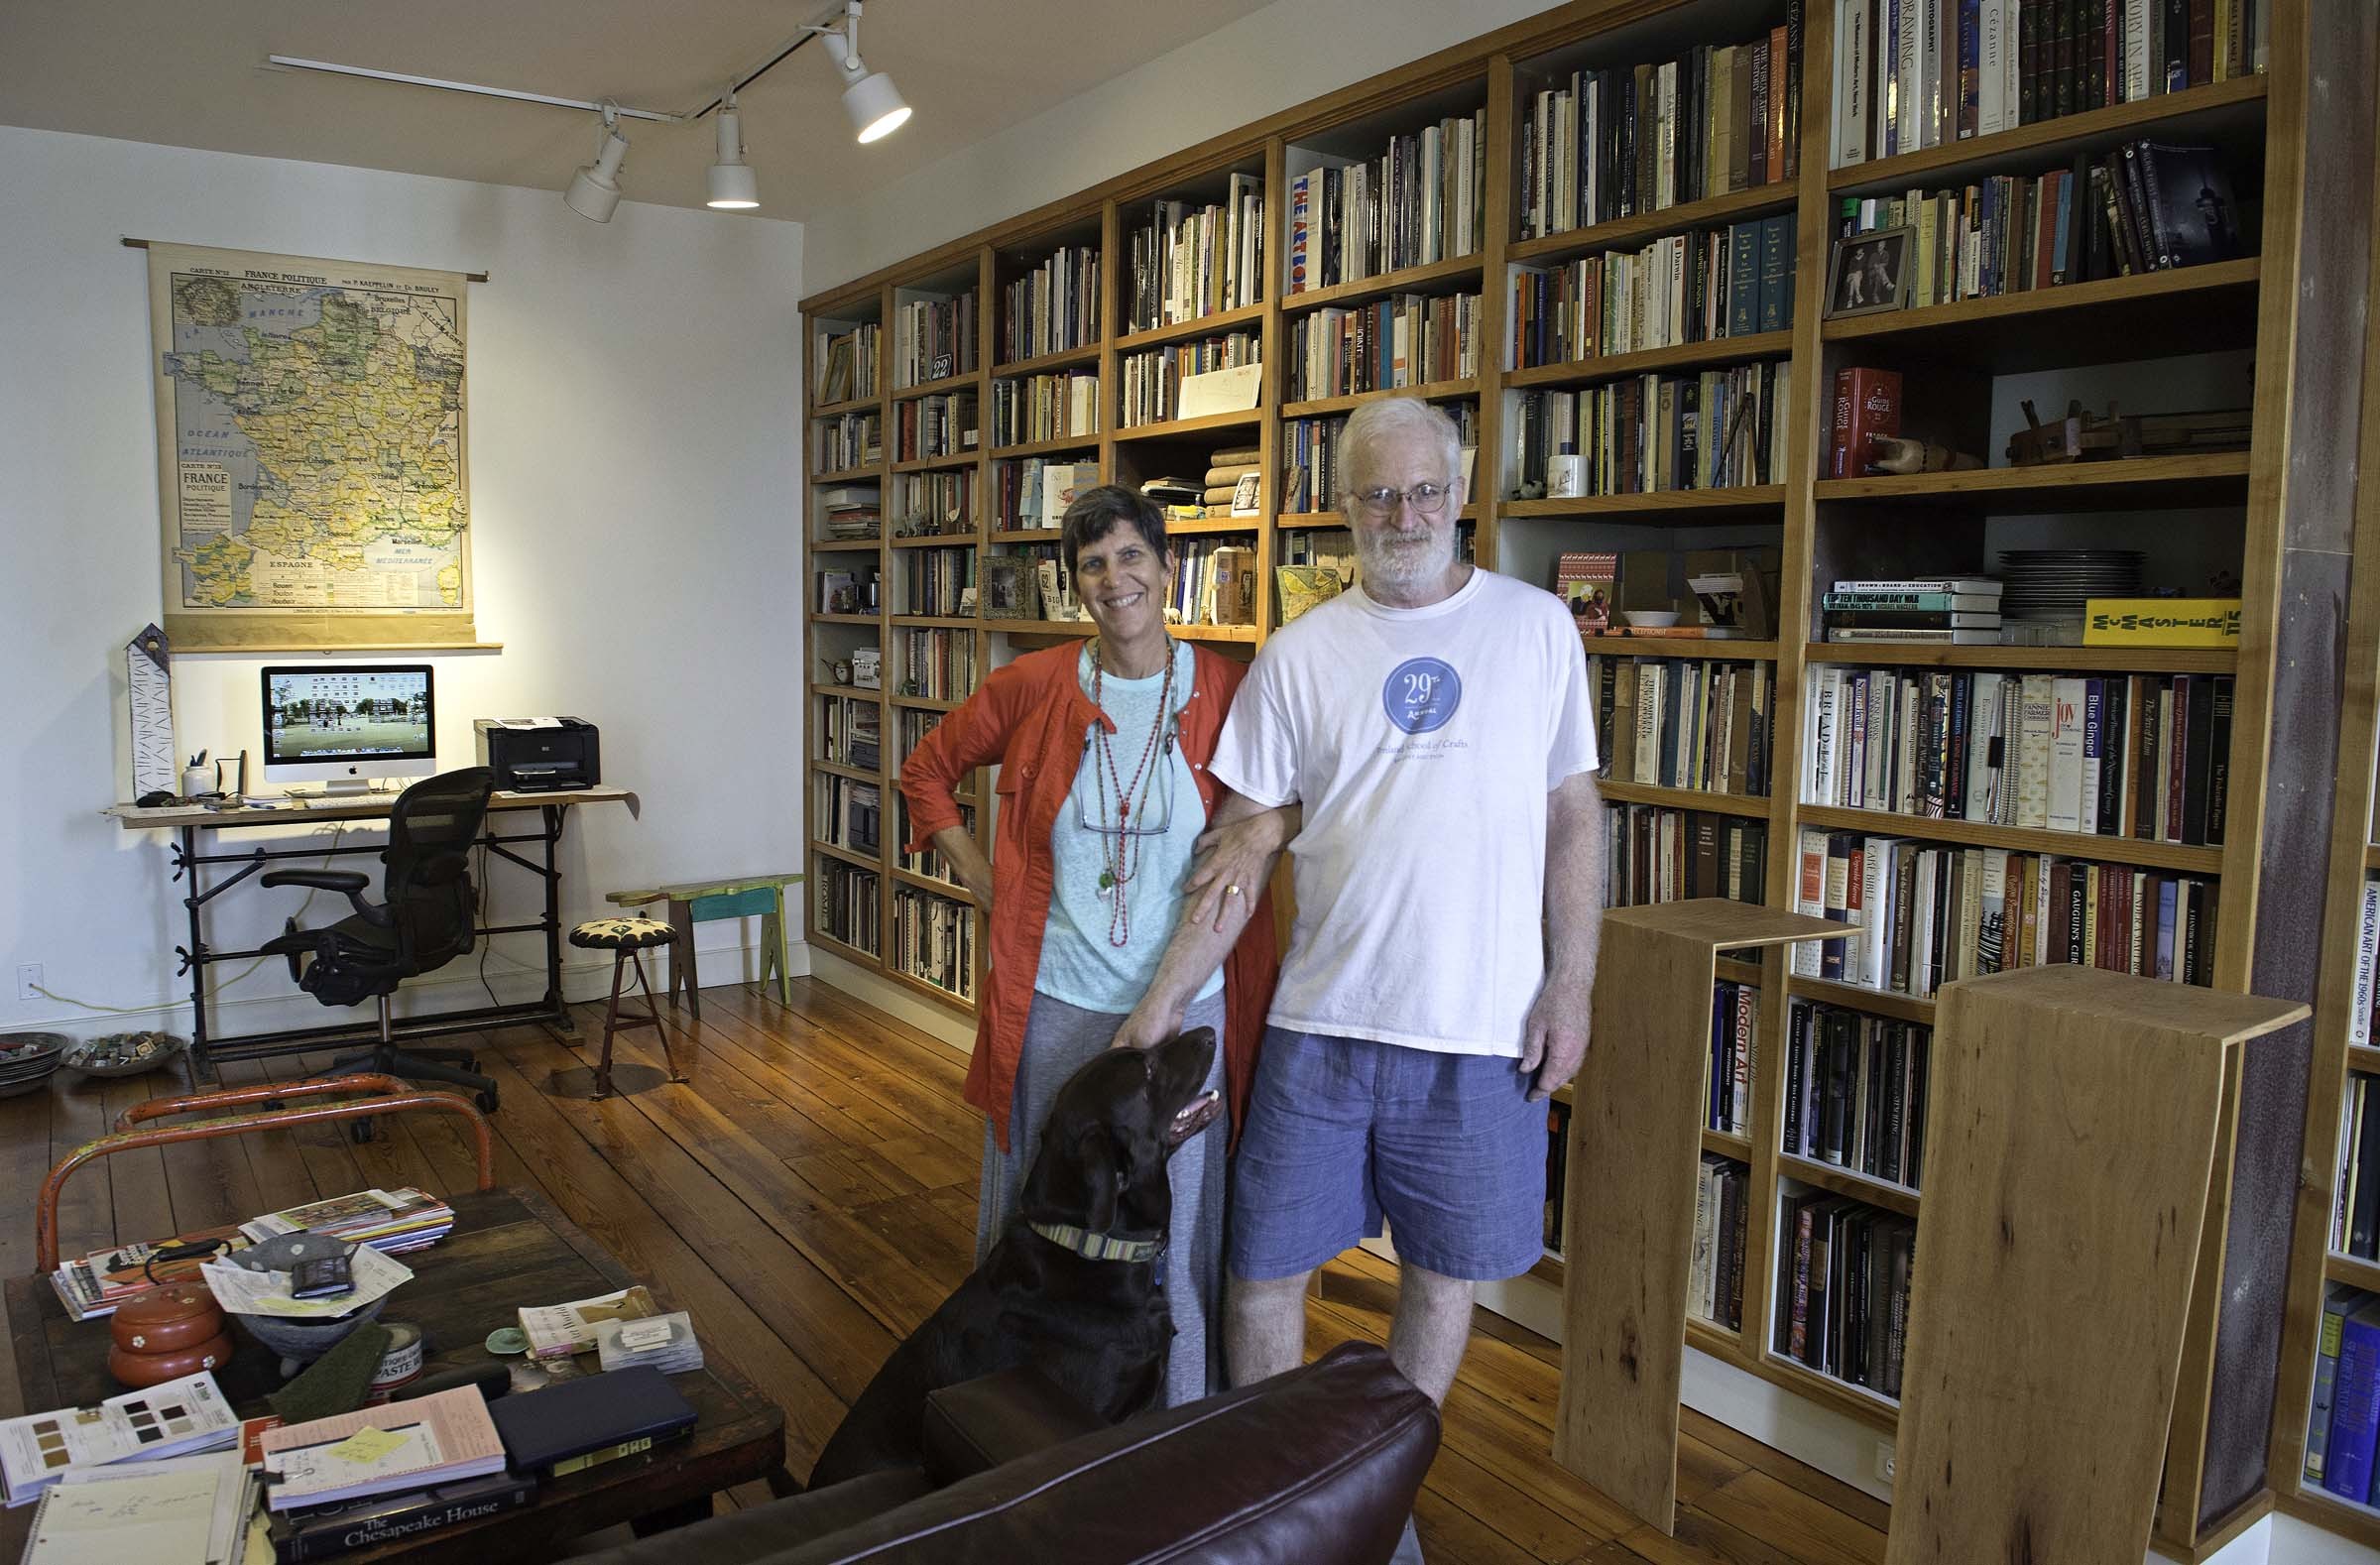 Aimee and Alain Joyaux at their three-story home and work space downtown. - SCOTT ELMQUIST